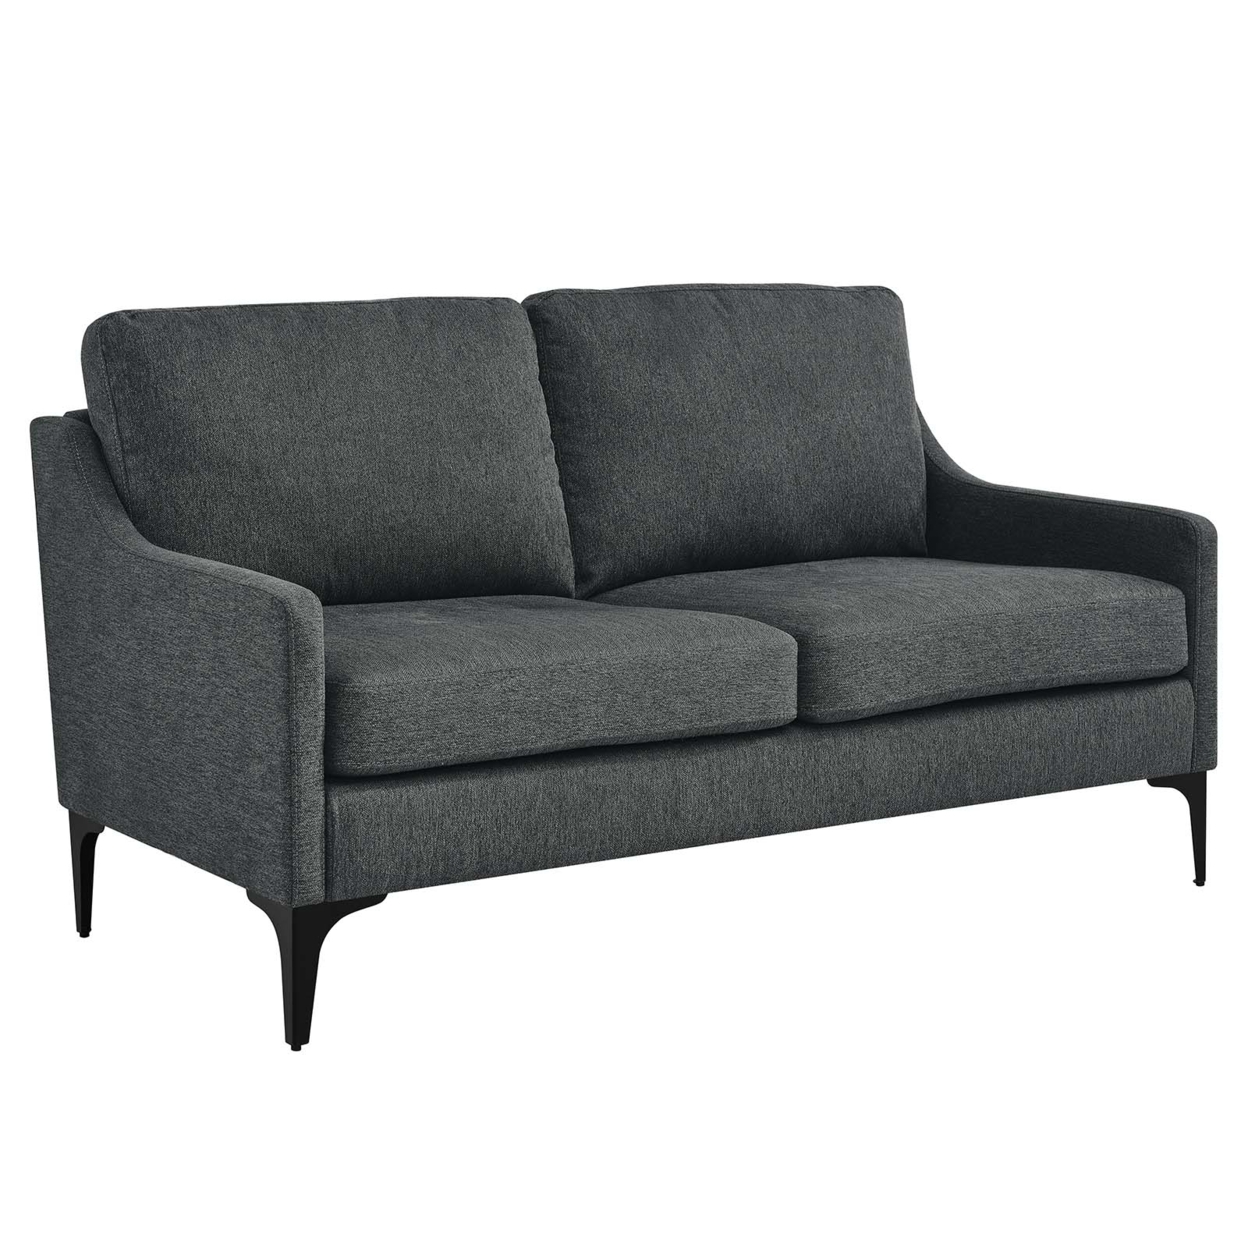 Corland Upholstered Fabric Loveseat, Charcoal